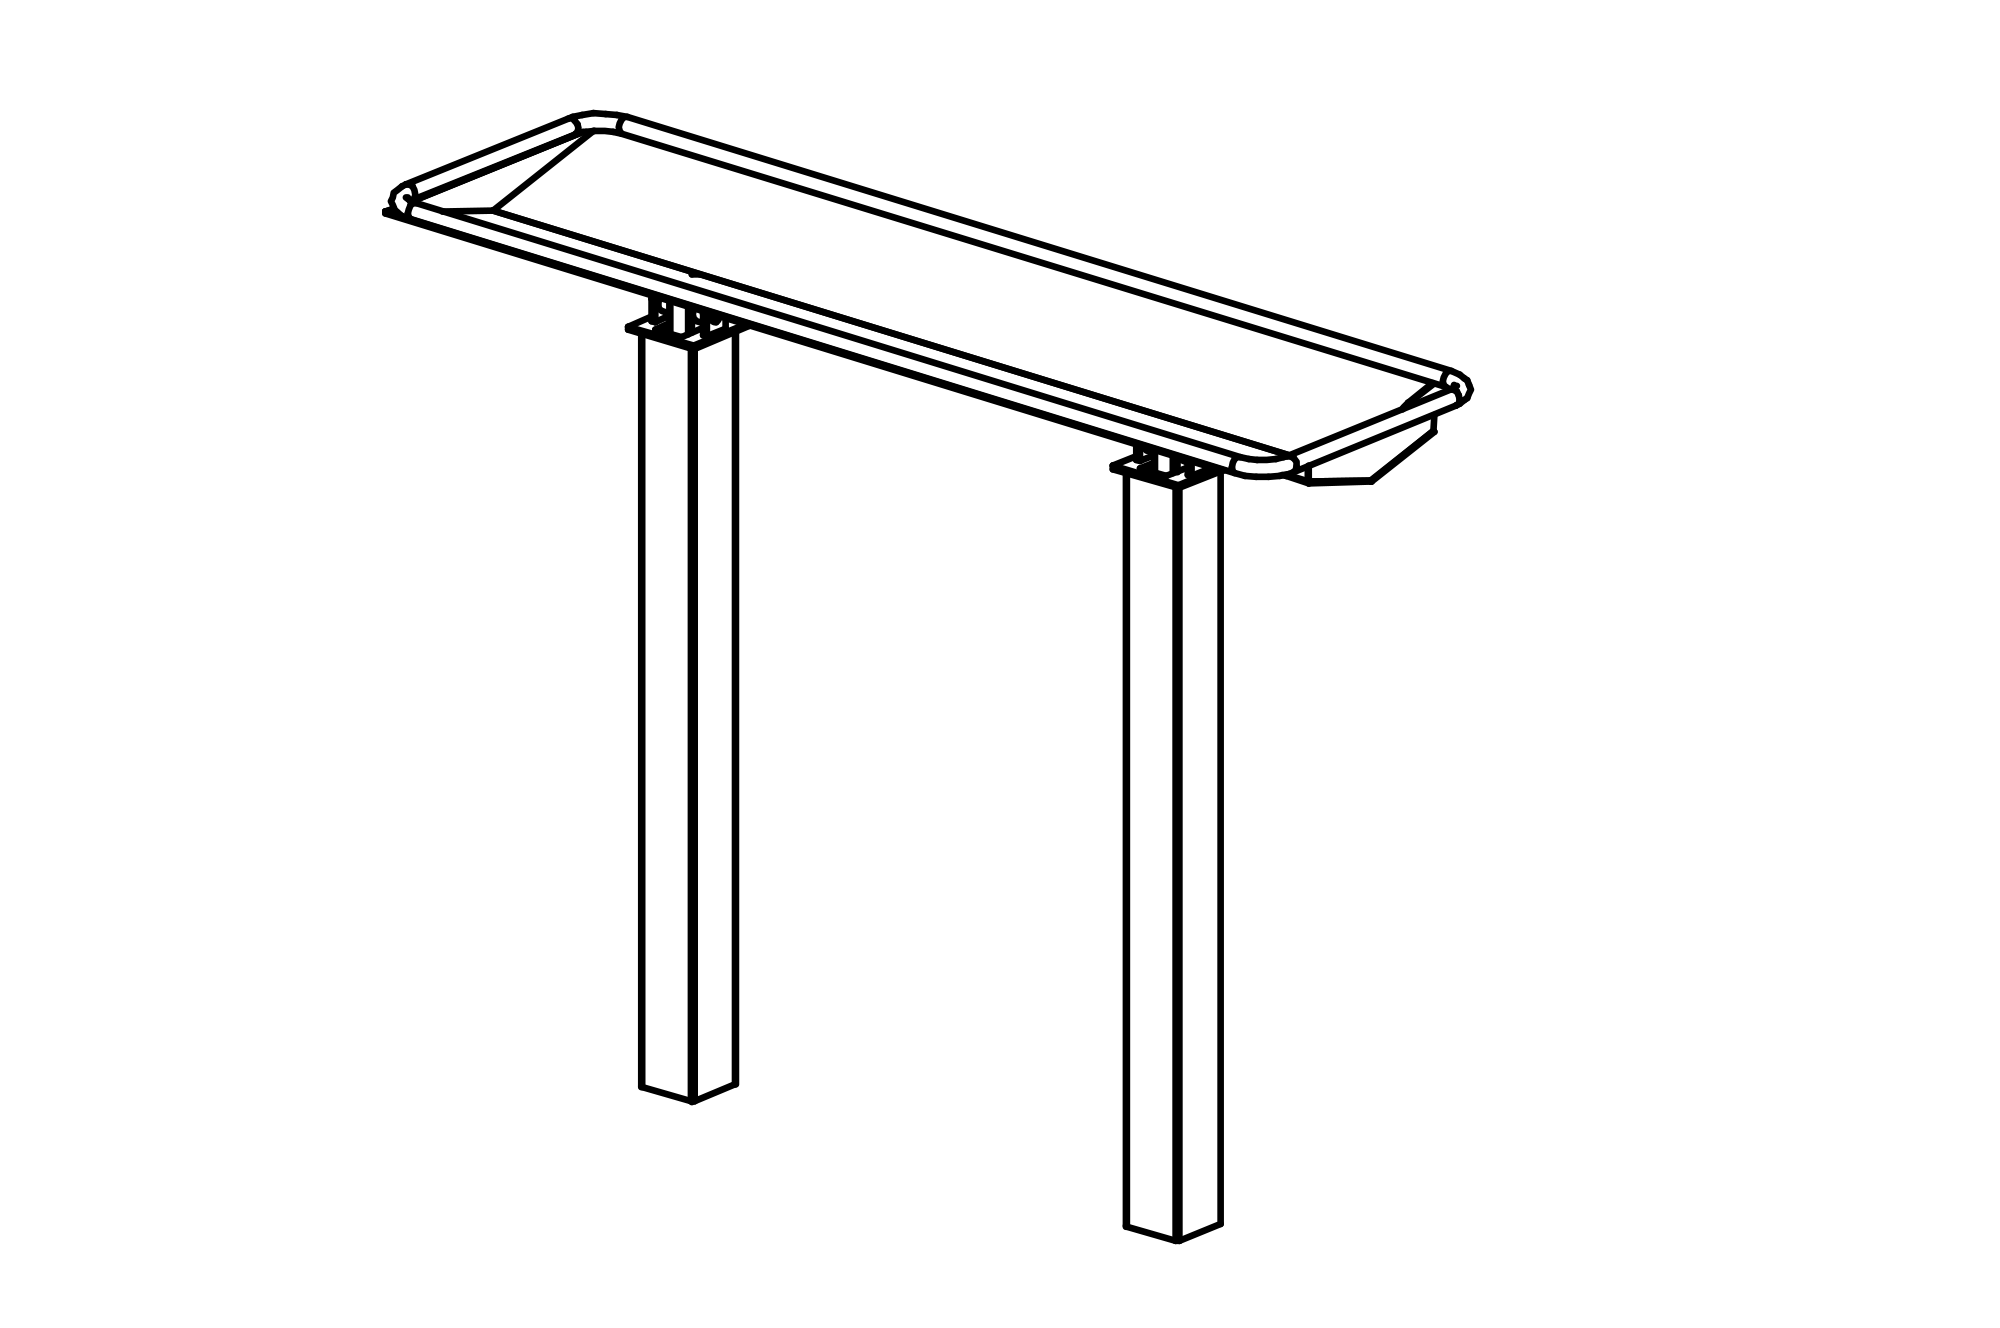 Basin with transverse see-saw, stainless steel, length = 2 m 